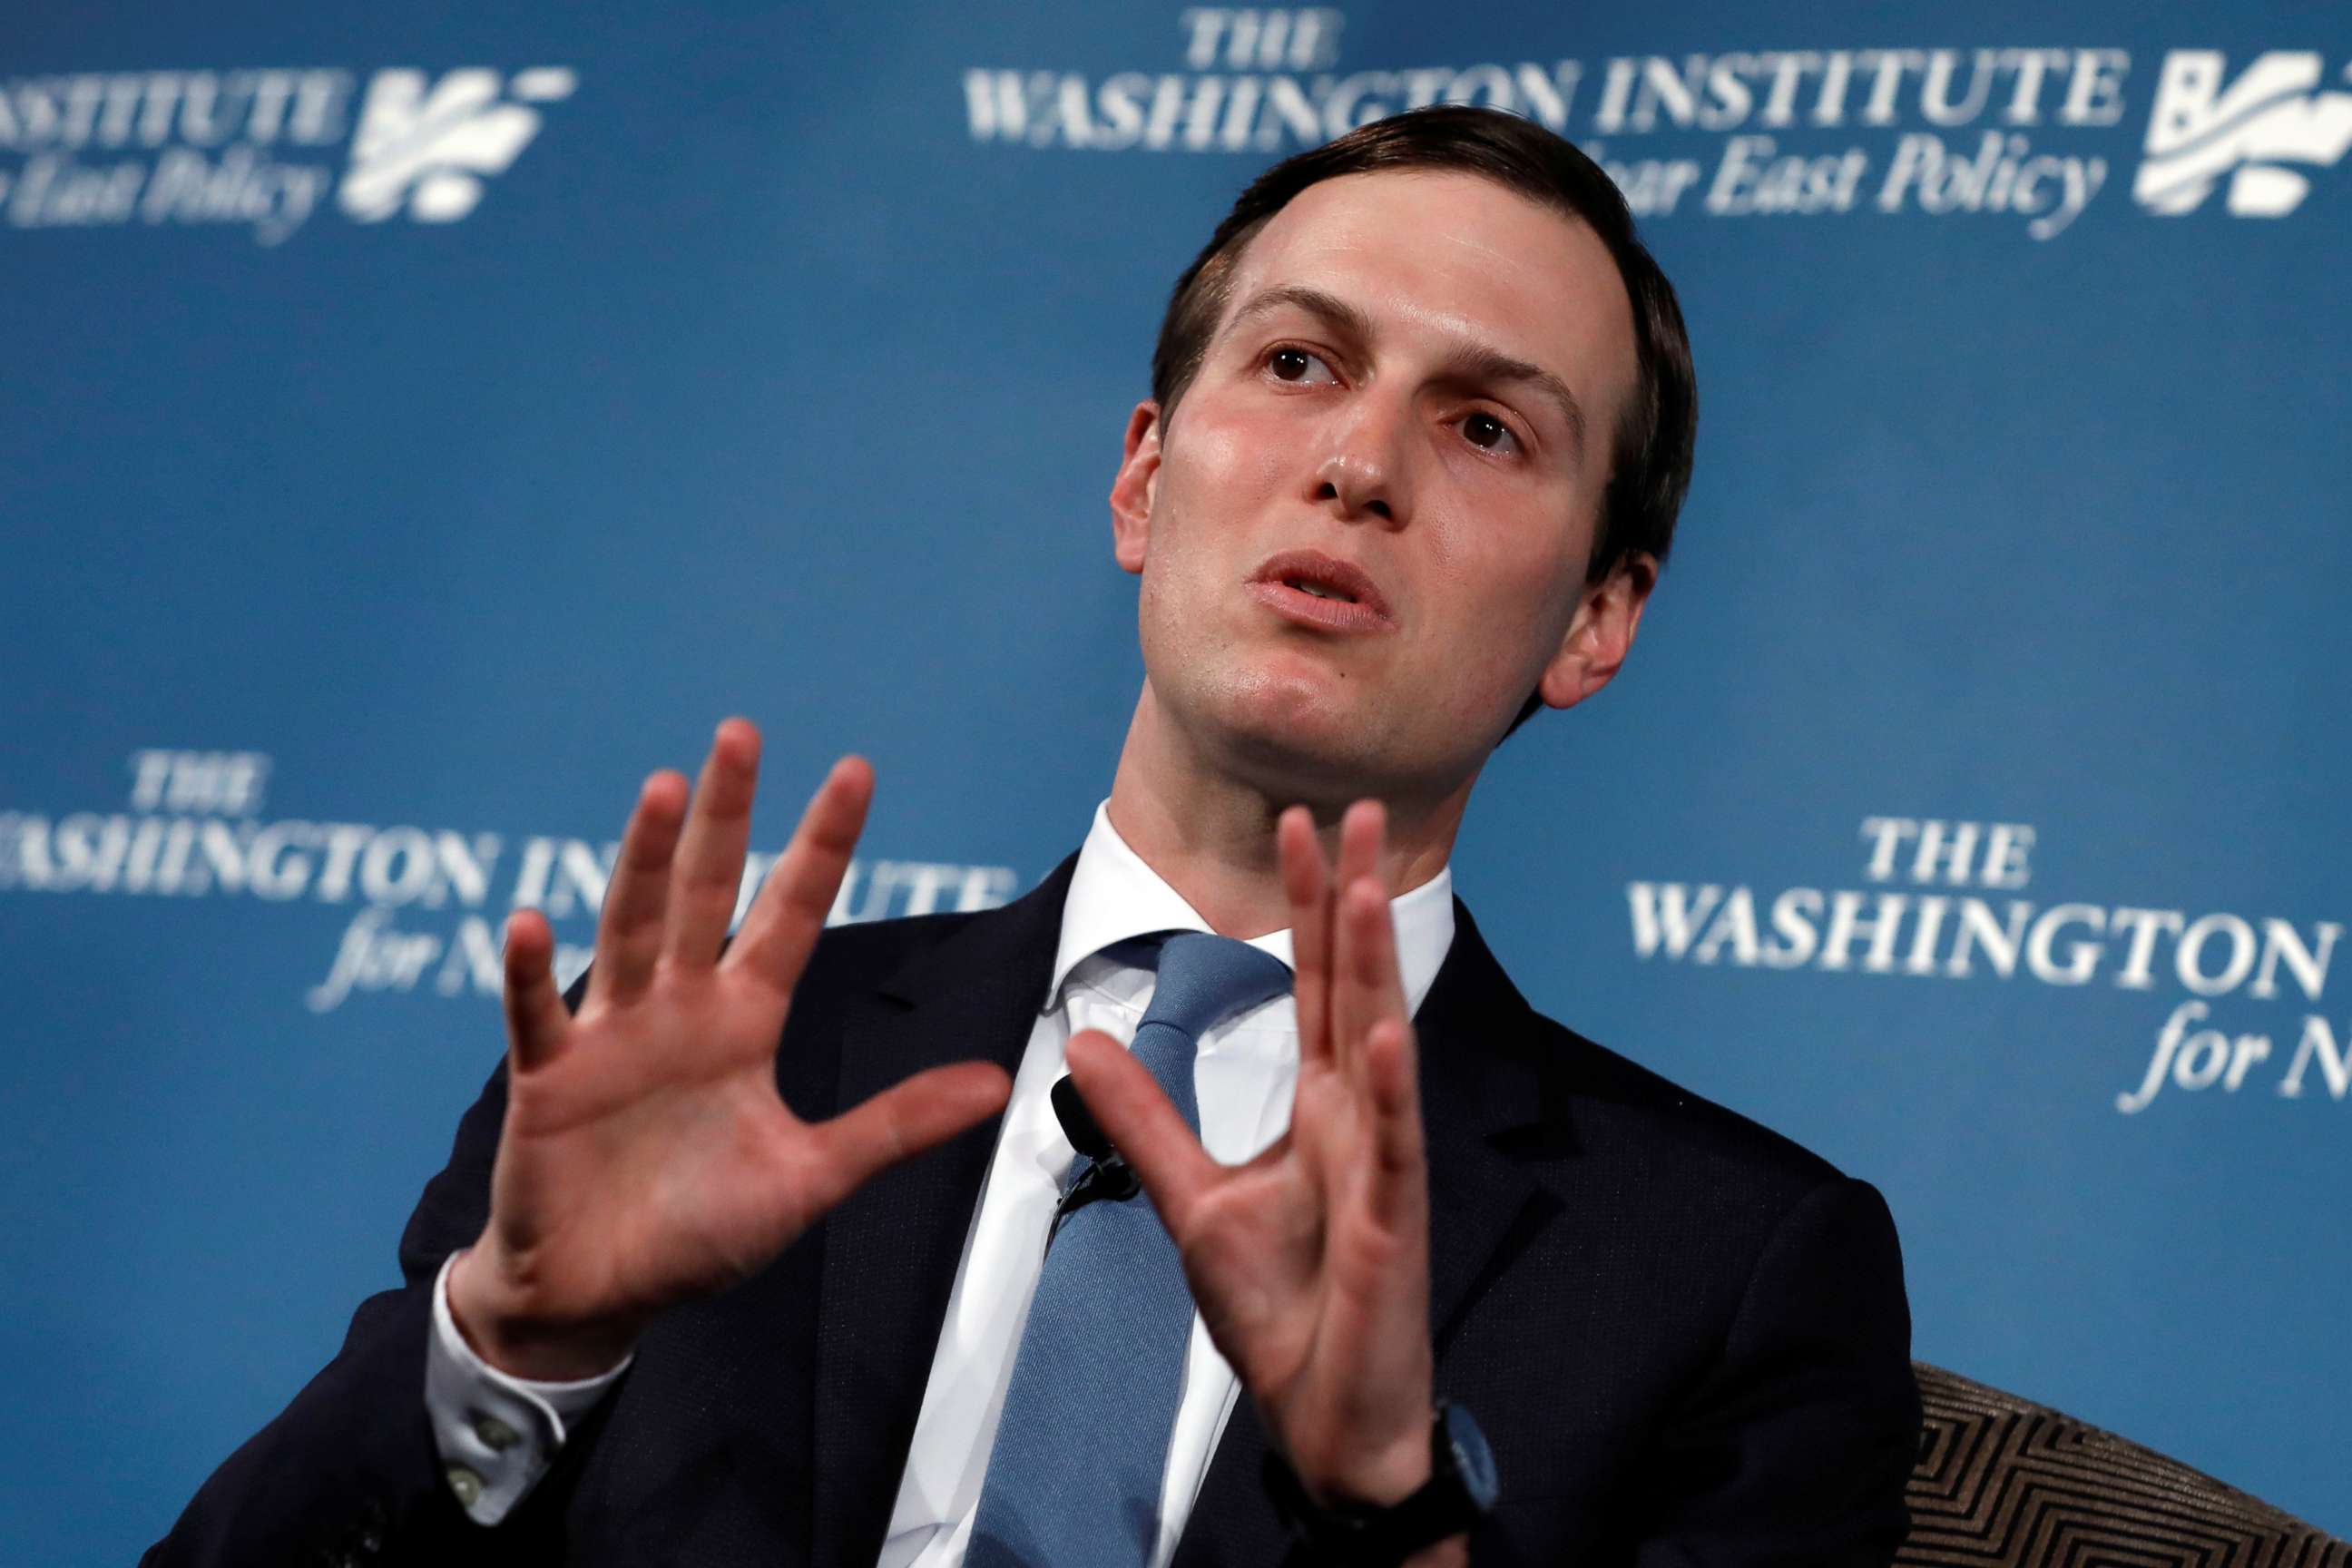 PHOTO: White House senior adviser Jared Kushner, U.S. President Donald Trump's son-in-law, speaks during a discussion at a dinner symposium of the Washington Institute for Near East Policy in Washington, May 2, 2019.